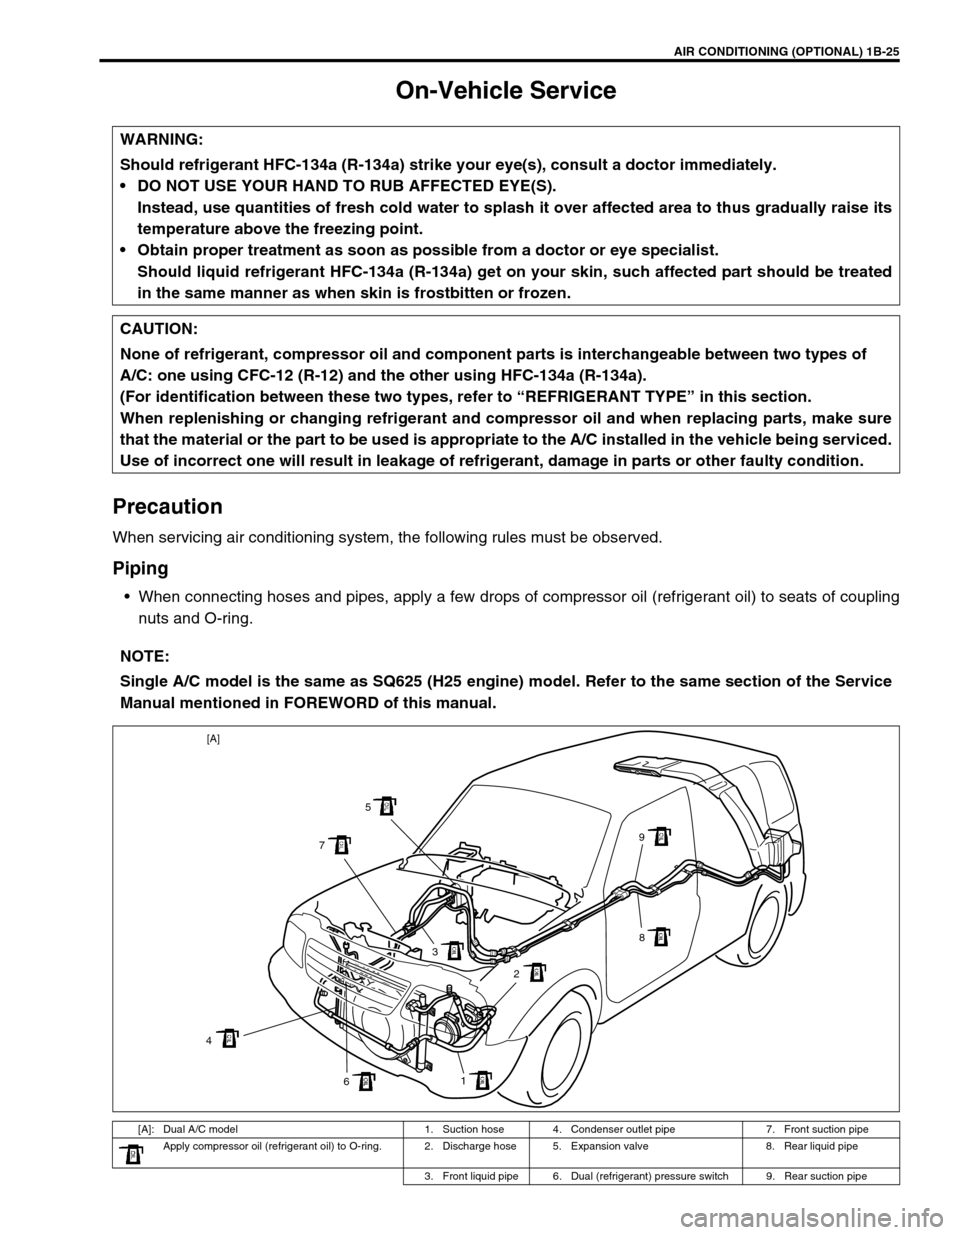 SUZUKI GRAND VITARA 2001 2.G Owners Manual AIR CONDITIONING (OPTIONAL) 1B-25
On-Vehicle Service
Precaution
When servicing air conditioning system, the following rules must be observed.
Piping
When connecting hoses and pipes, apply a few drops